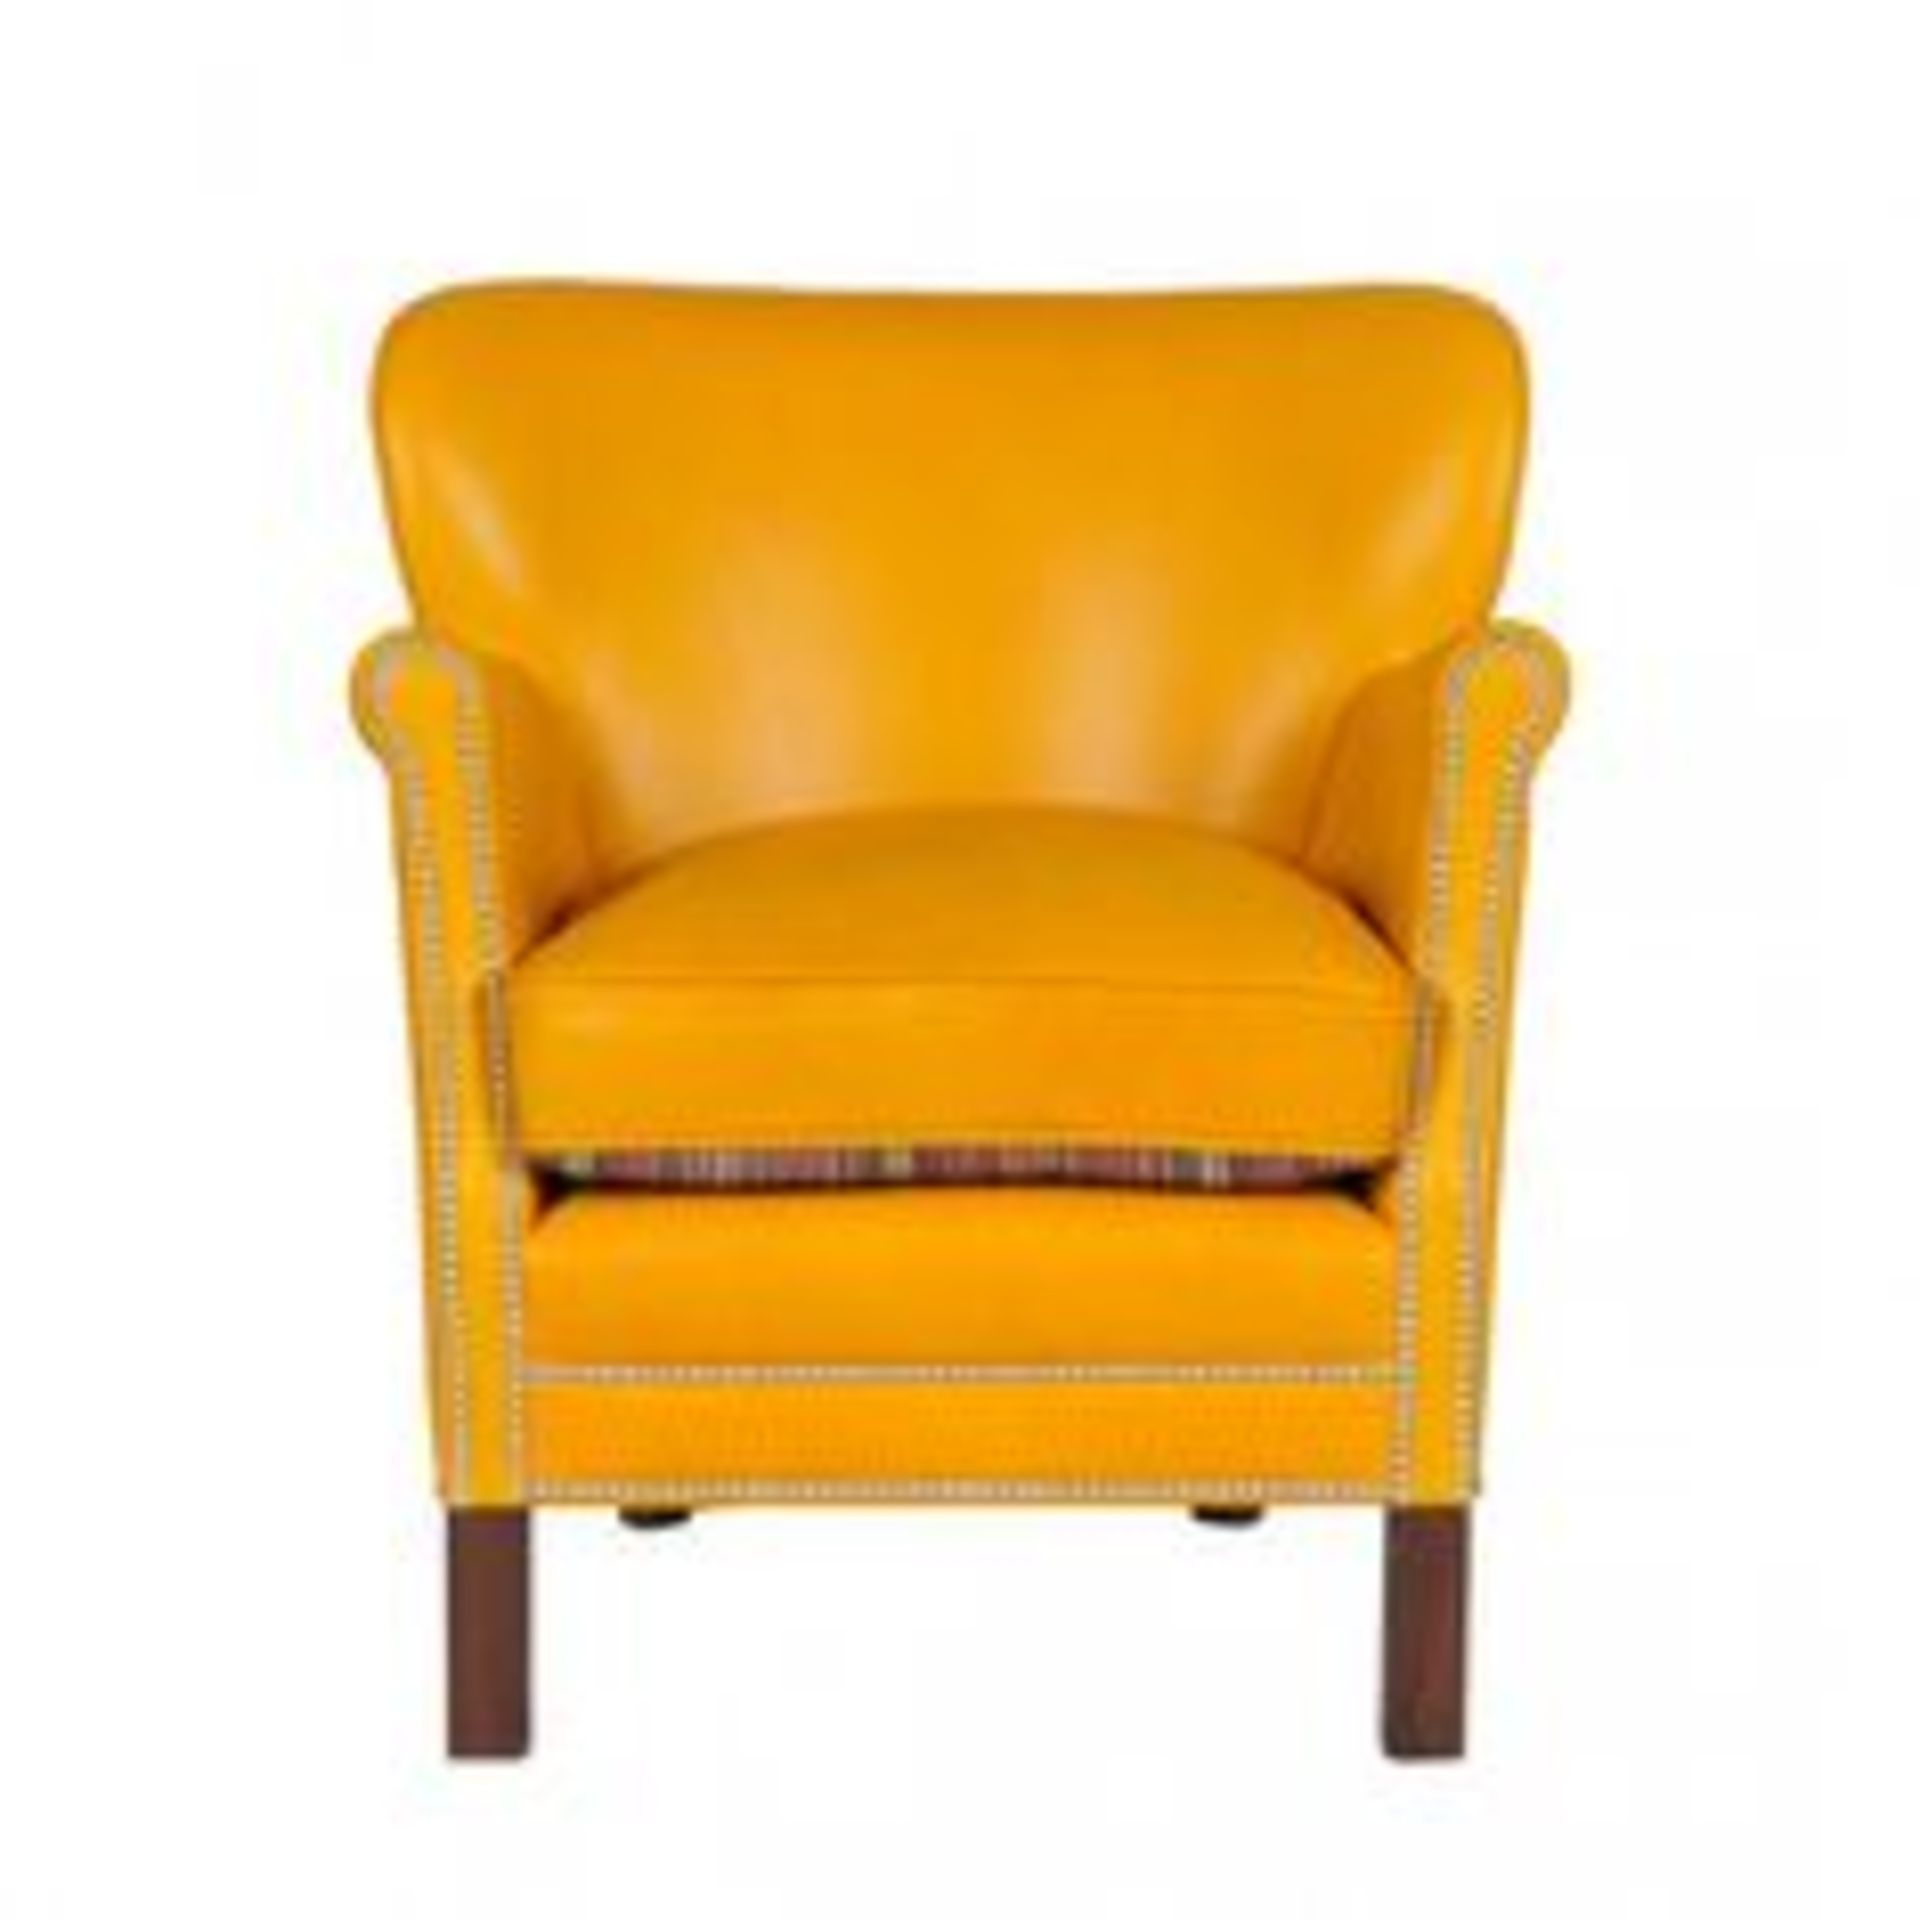 Tutors Chair In Leather Oxford Scholar Gold Chair Features A Rounded Back Reworked And Extended, And